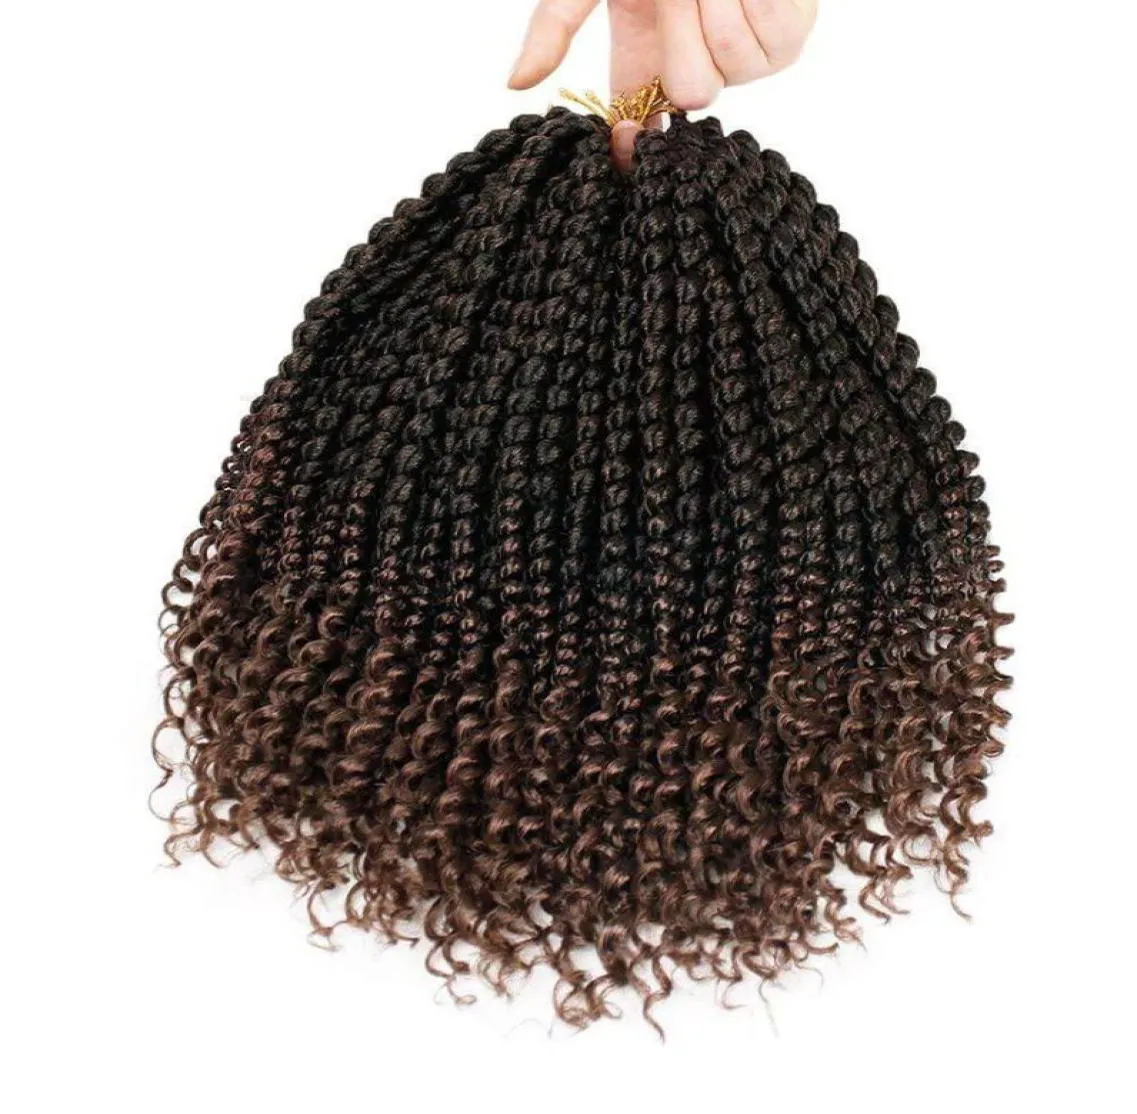 WATER WAVE Spring synthetic crochet braids tress hair with water weave curly in pre 18inch tress Hair Bulks9540635